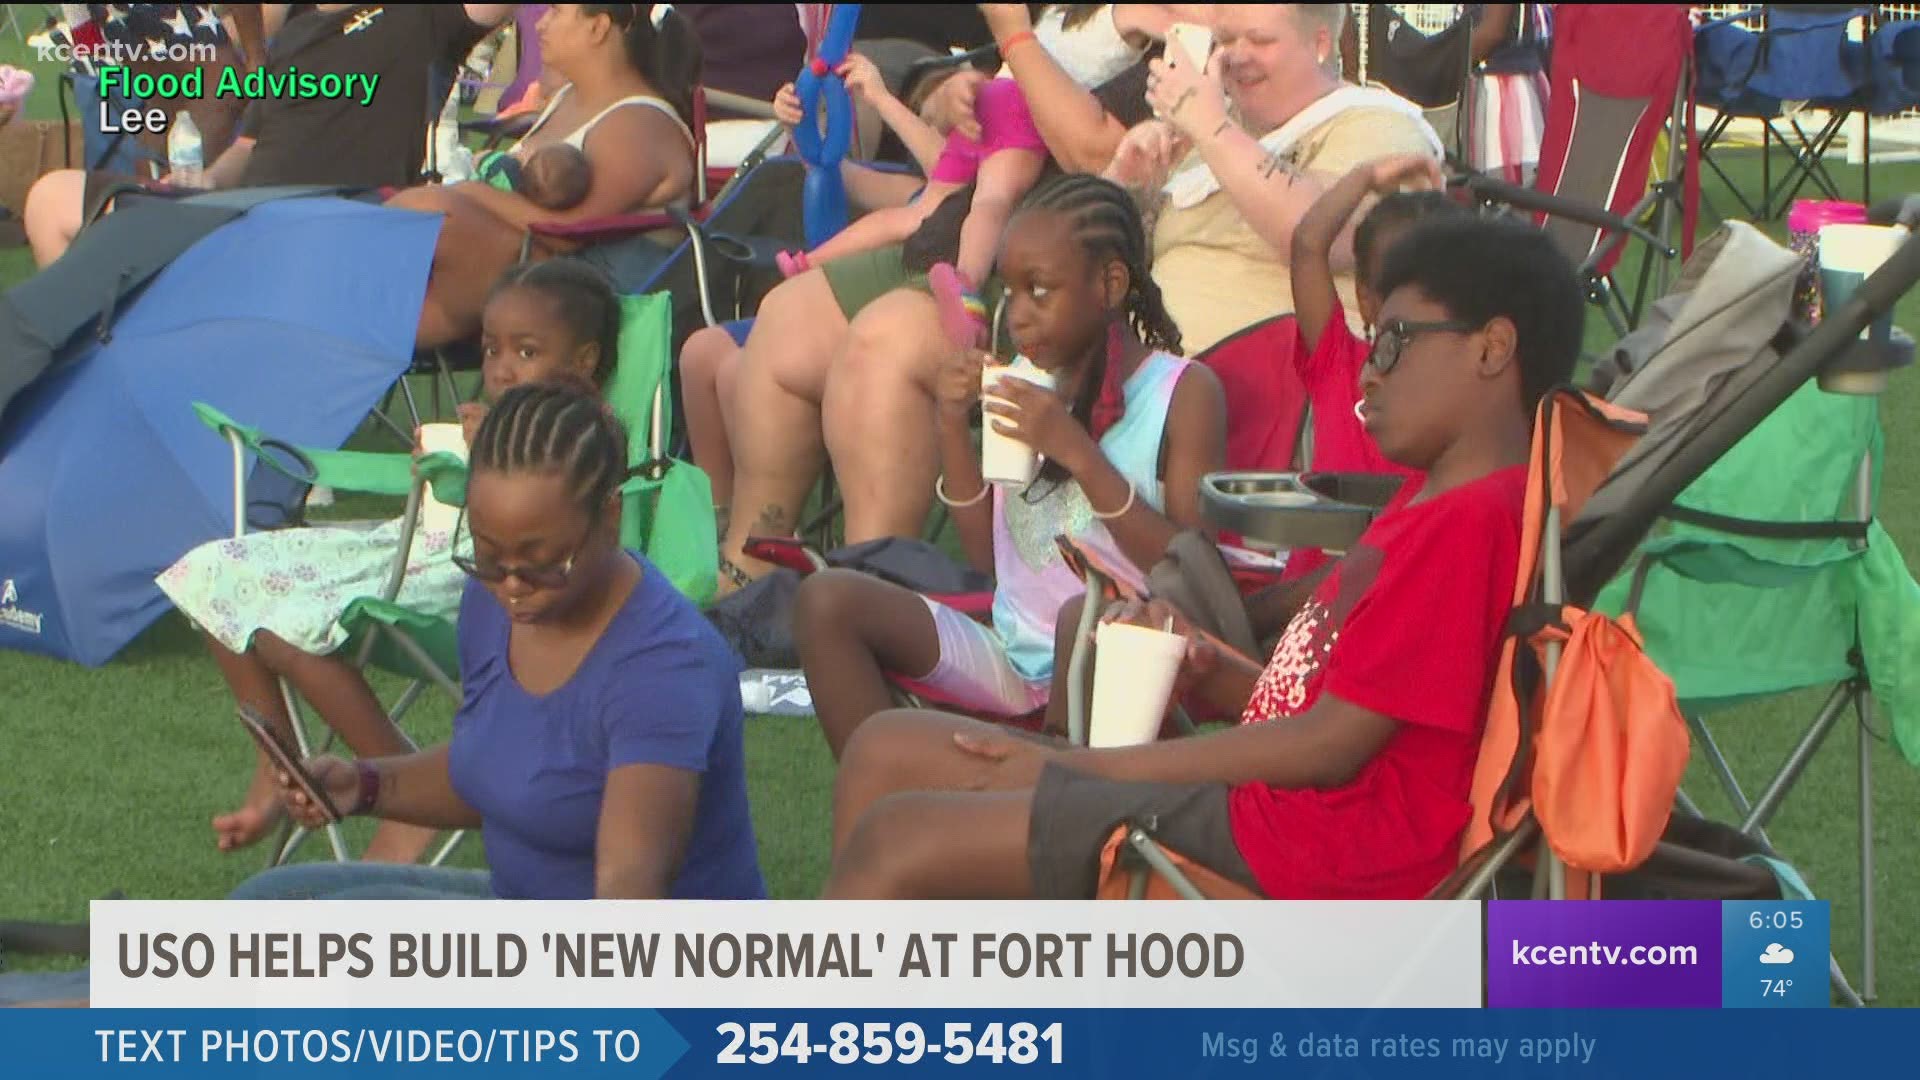 Community members gathered at Hood Stadium for music, entertainment and food after a year of social distancing and COVID-19 guidelines.